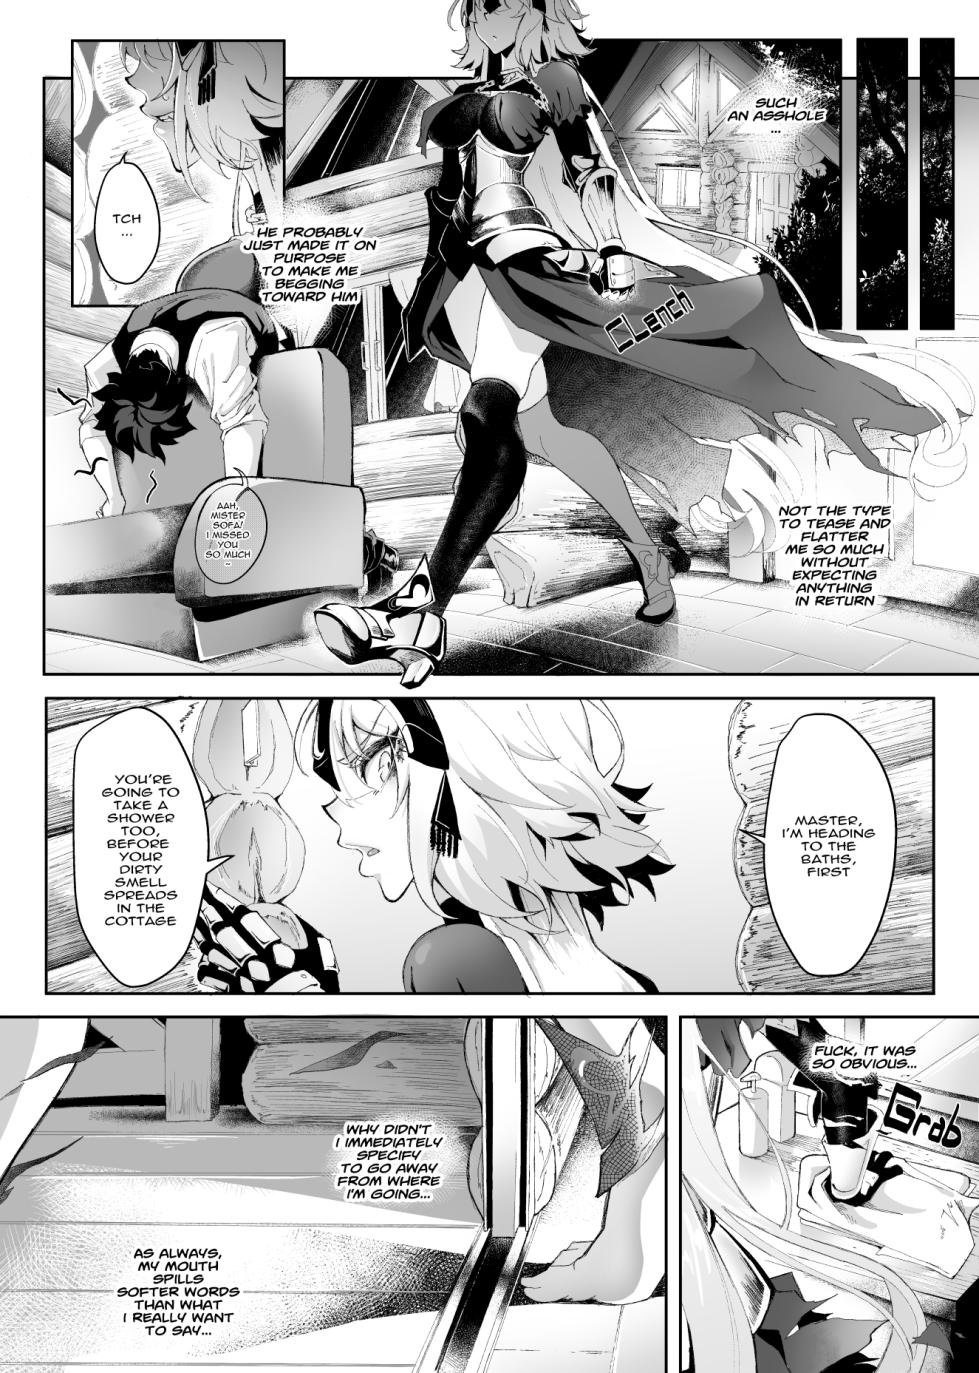 [Kid] The Baddest (Fate/Grand Order) - Page 14